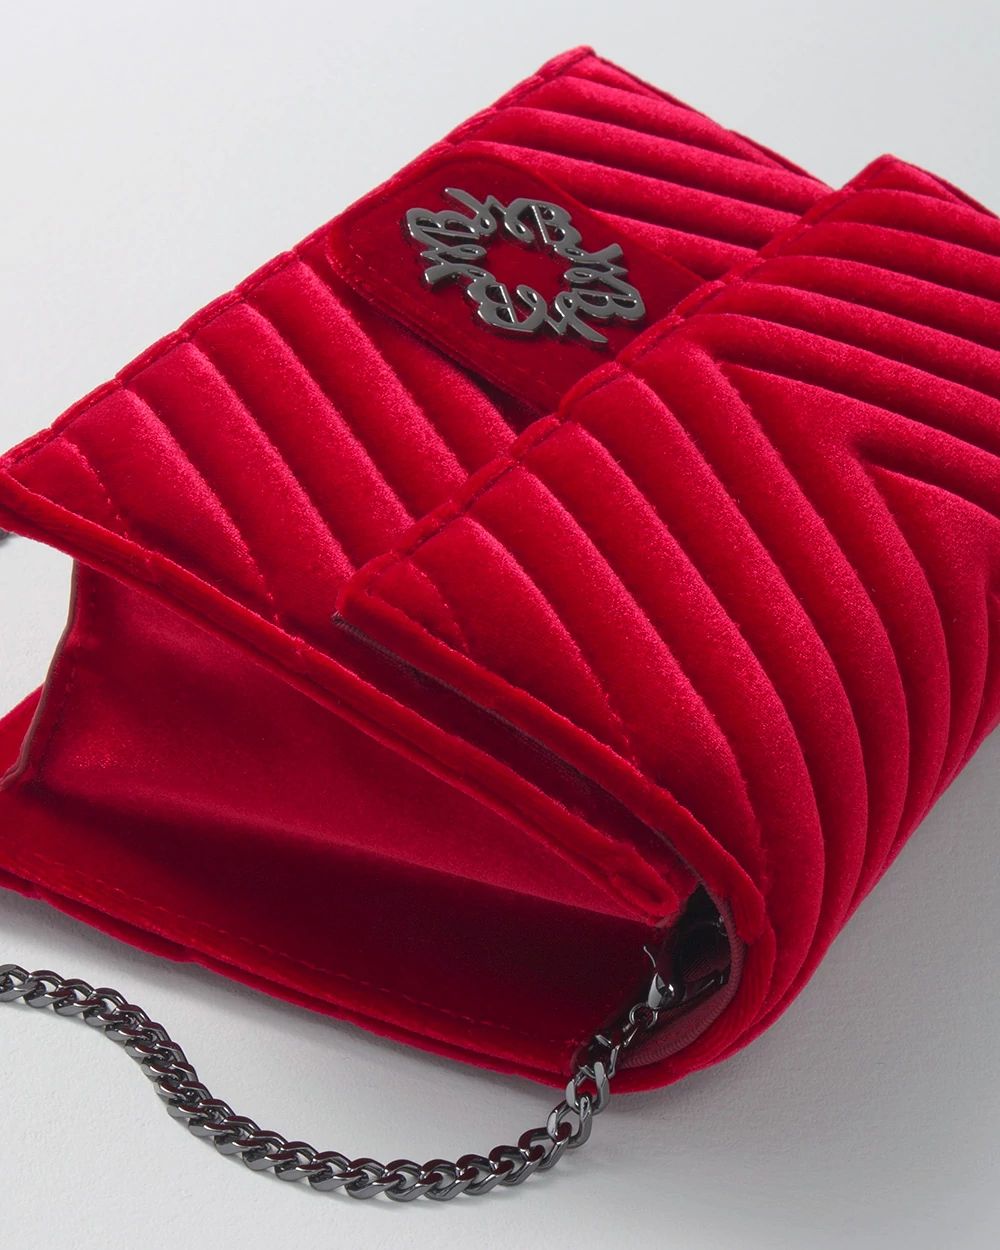 Red Velvet Crossbody Bag click to view larger image.